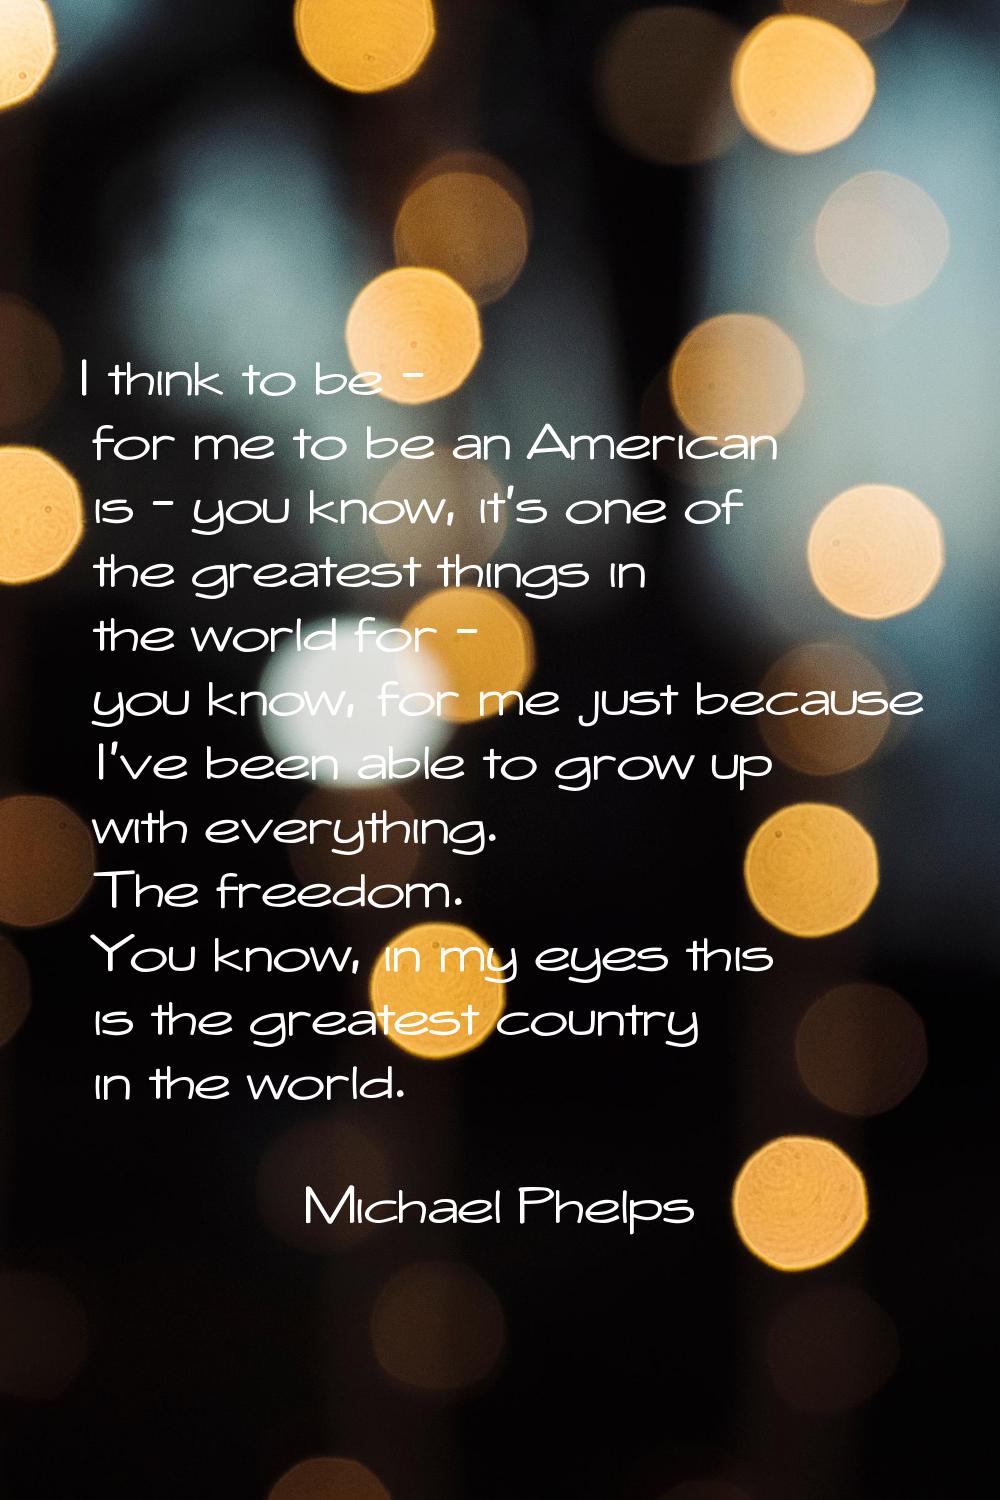 I think to be - for me to be an American is - you know, it's one of the greatest things in the worl